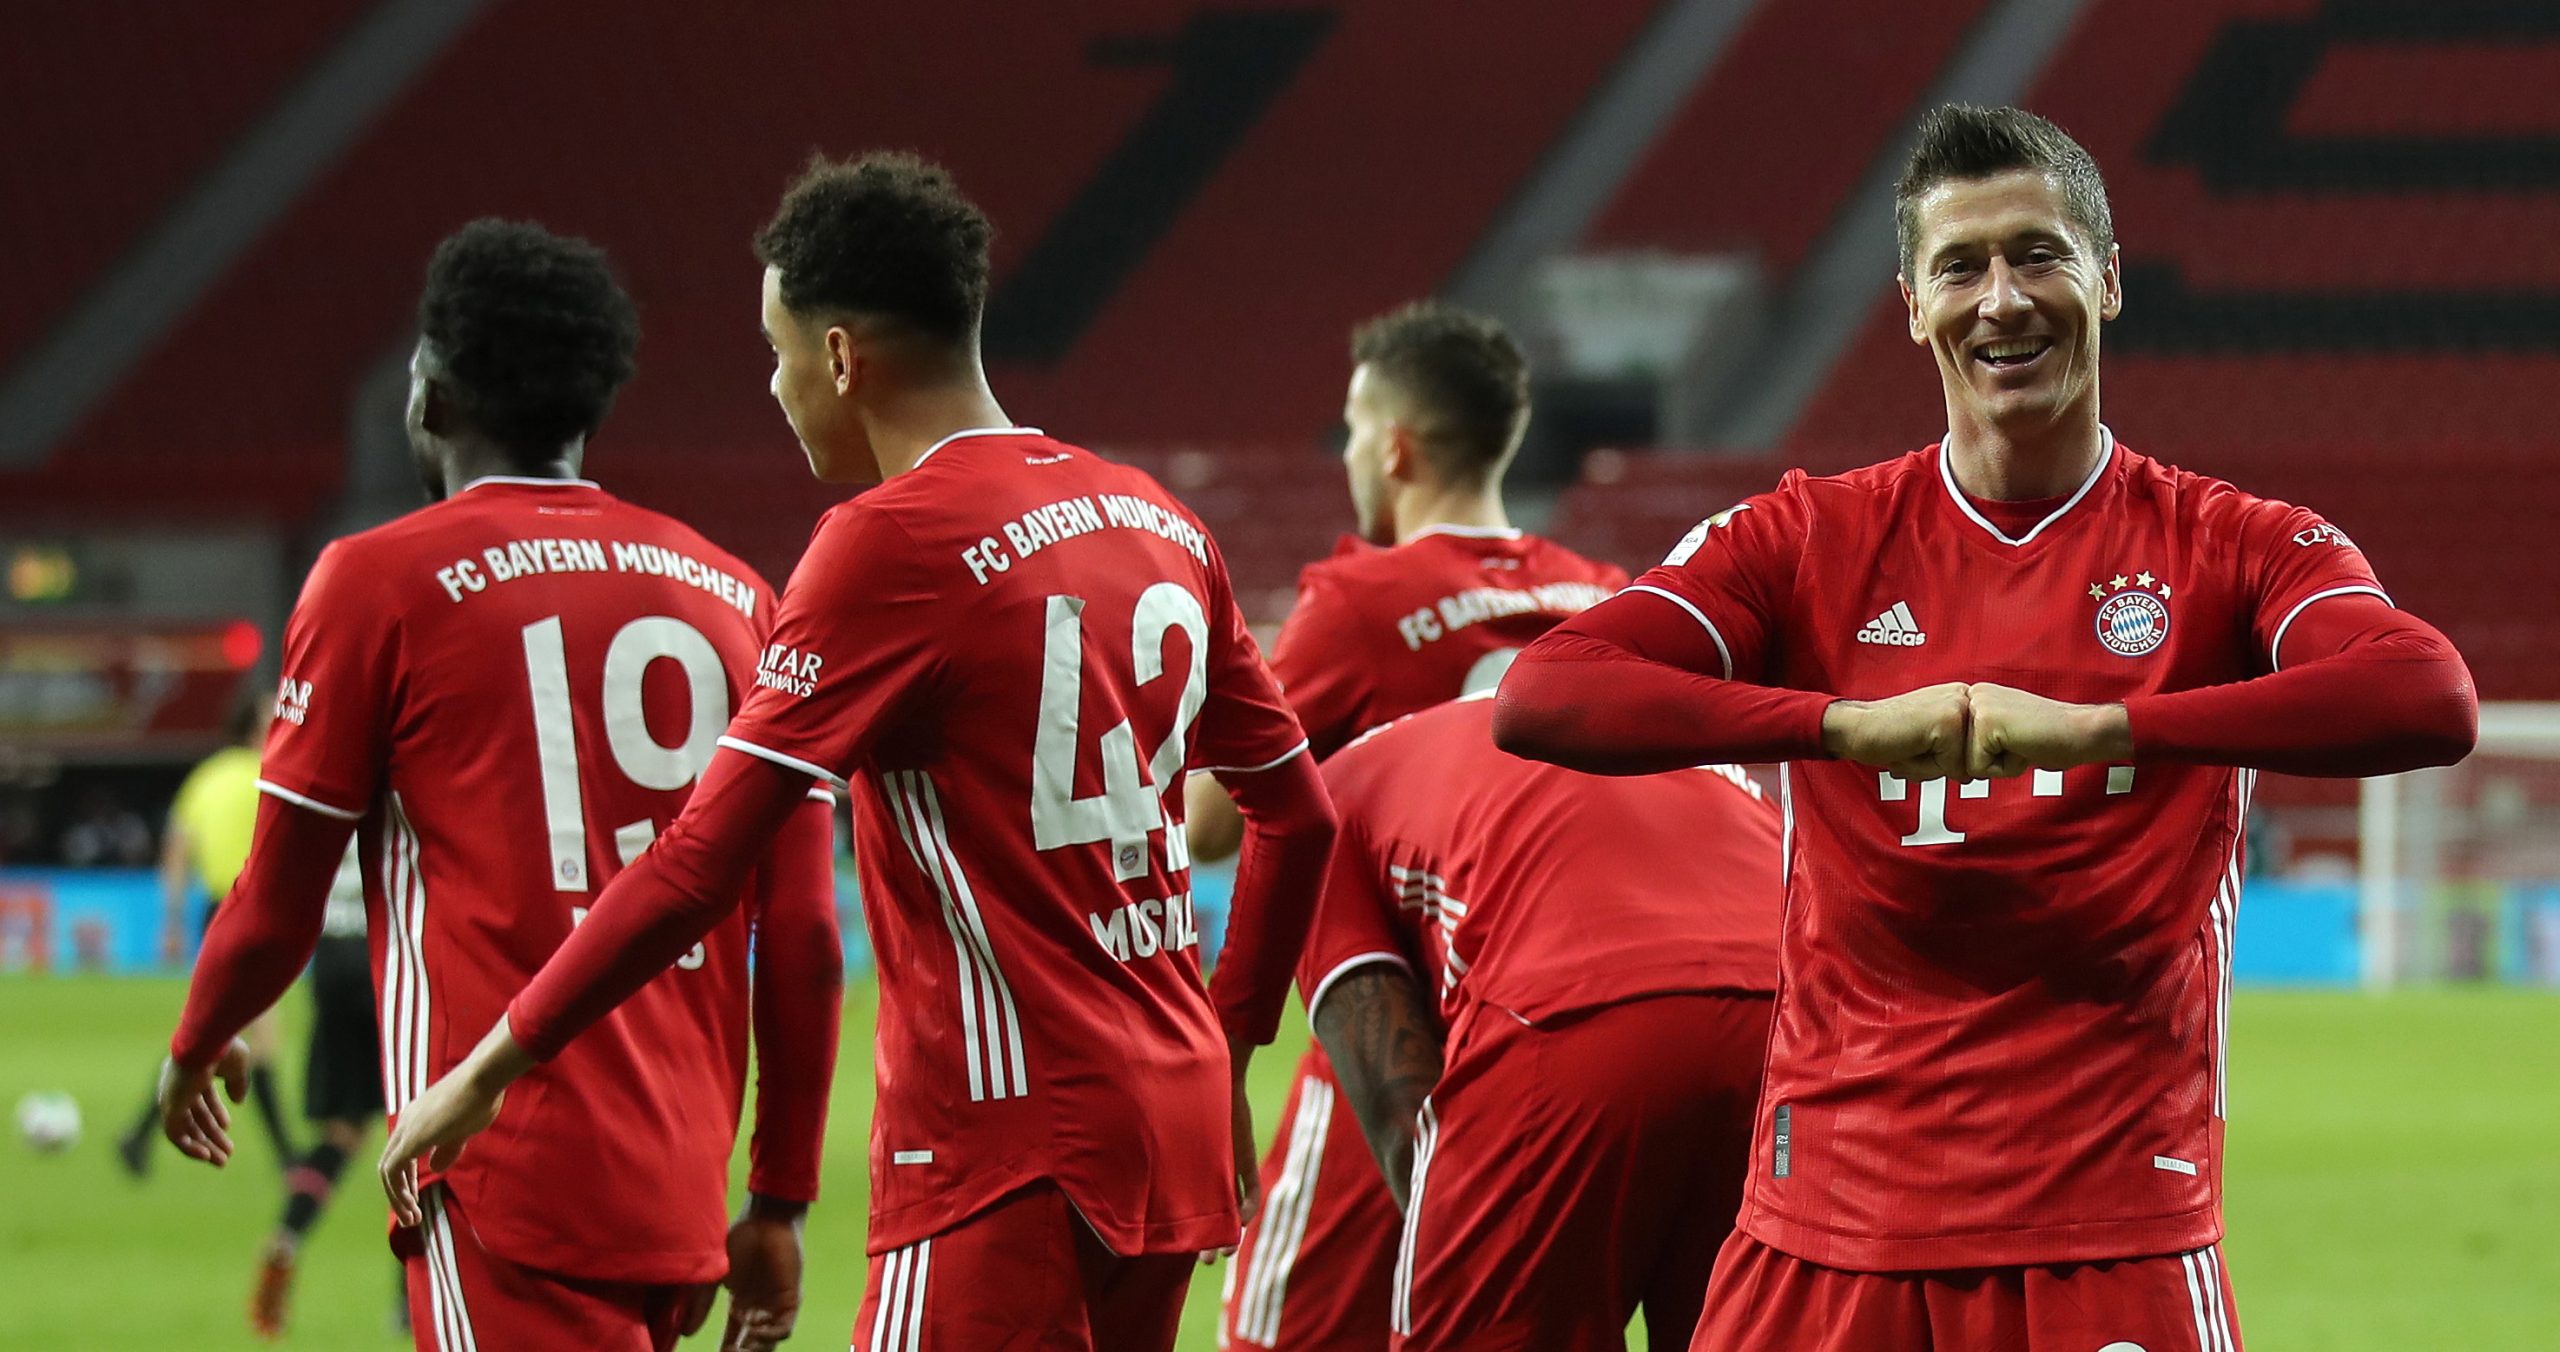 epa08894554 Robert Lewandowski (R) of FC Bayern Munich celebrates with teammates after scoring the winning goal during the German Bundesliga soccer match between Bayer 04 Leverkusen and FC Bayern Munich at BayArena in Leverkusen, Germany, 19 December 2020.  EPA/LARS BARON / POOL CONDITIONS - ATTENTION:  The DFL regulations prohibit any use of photographs as image sequences and/or quasi-video.